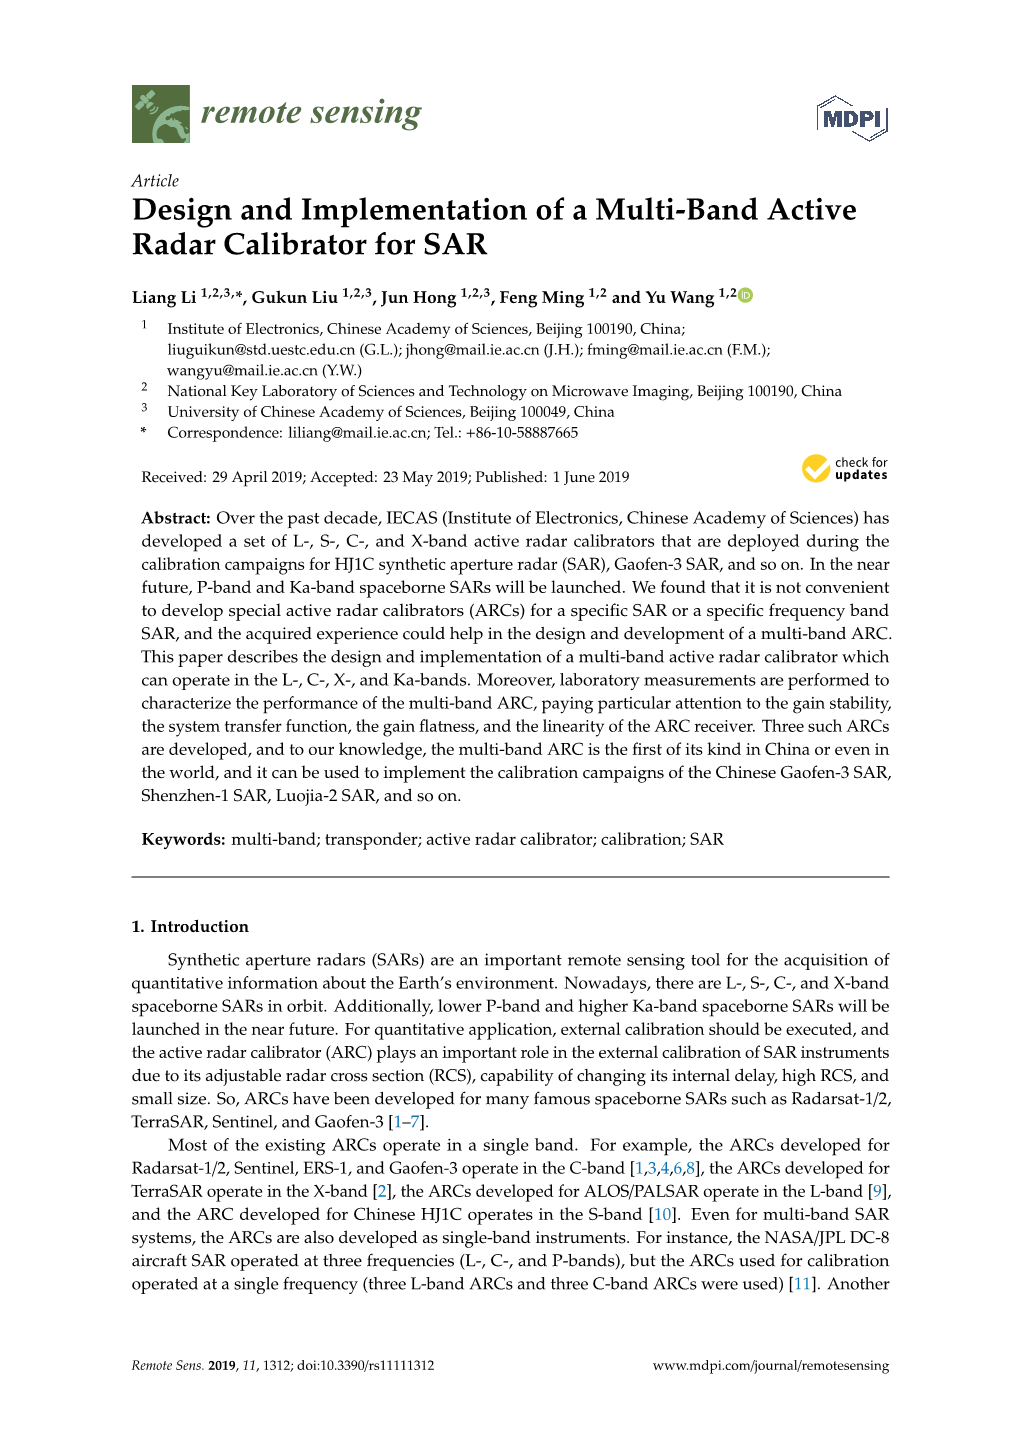 Design and Implementation of a Multi-Band Active Radar Calibrator for SAR